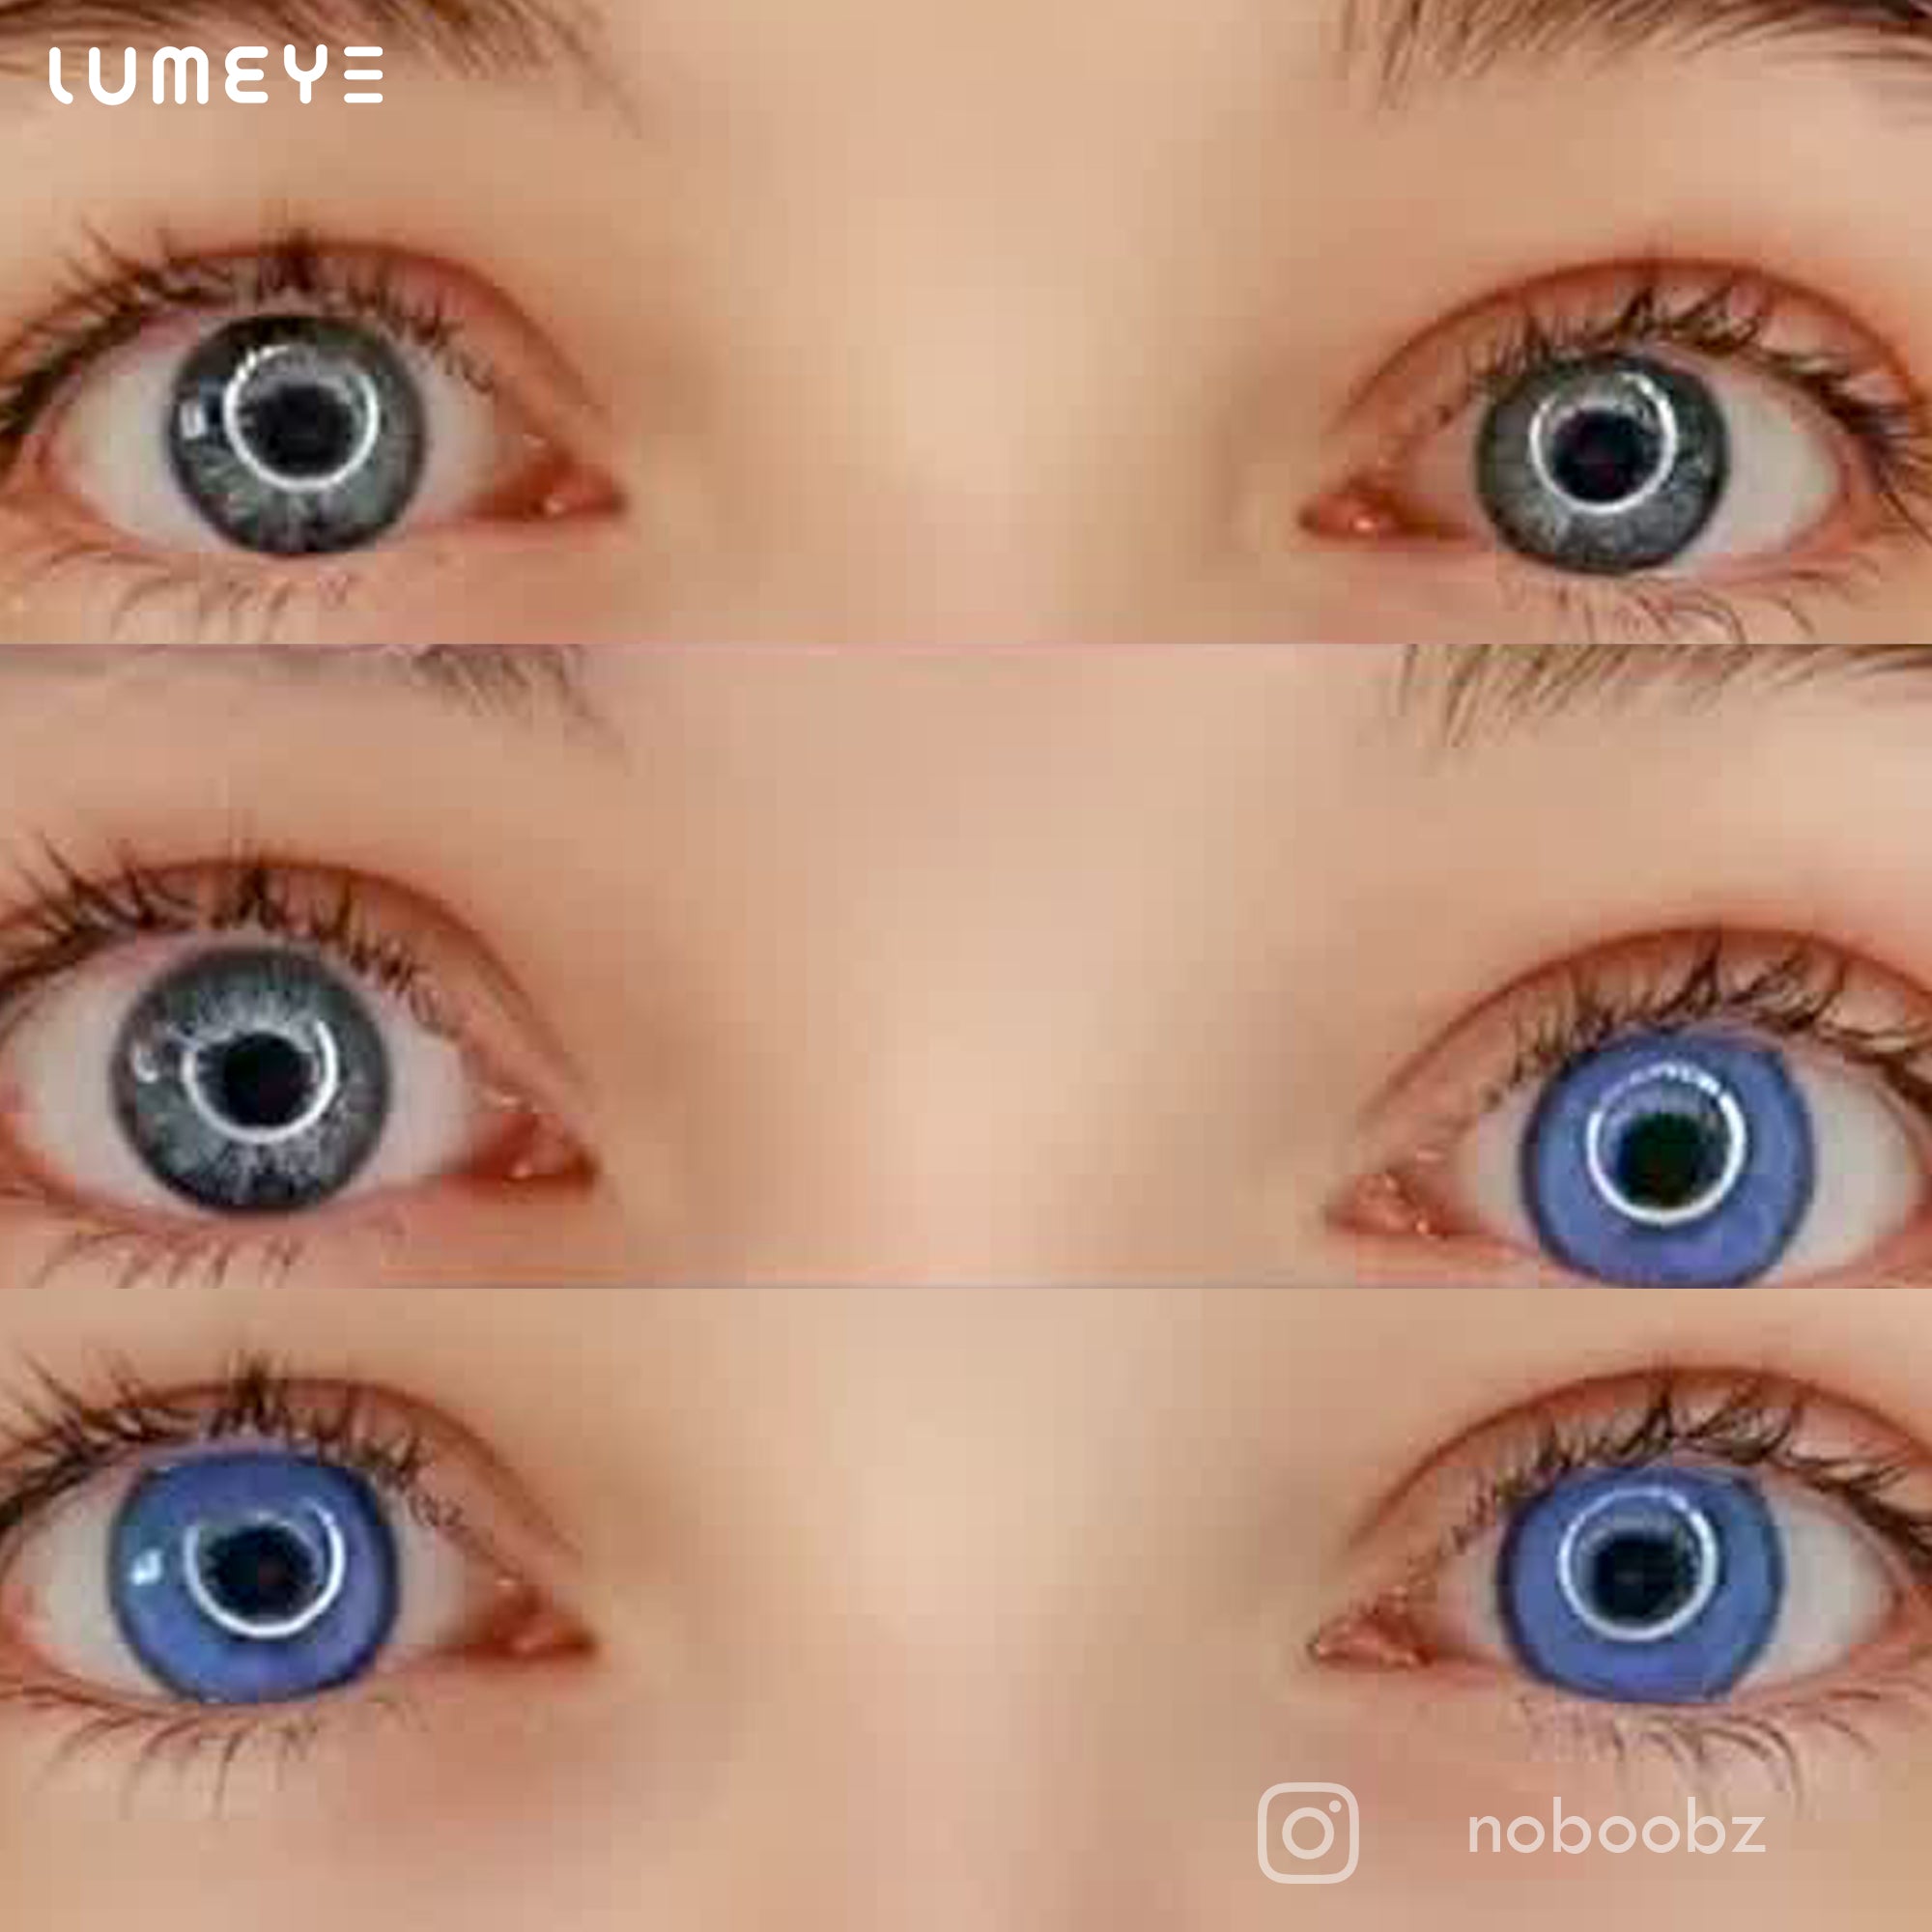 Best COLORED CONTACTS - LUMEYE Glowing Sunset Blue Colored Contact Lenses - LUMEYE